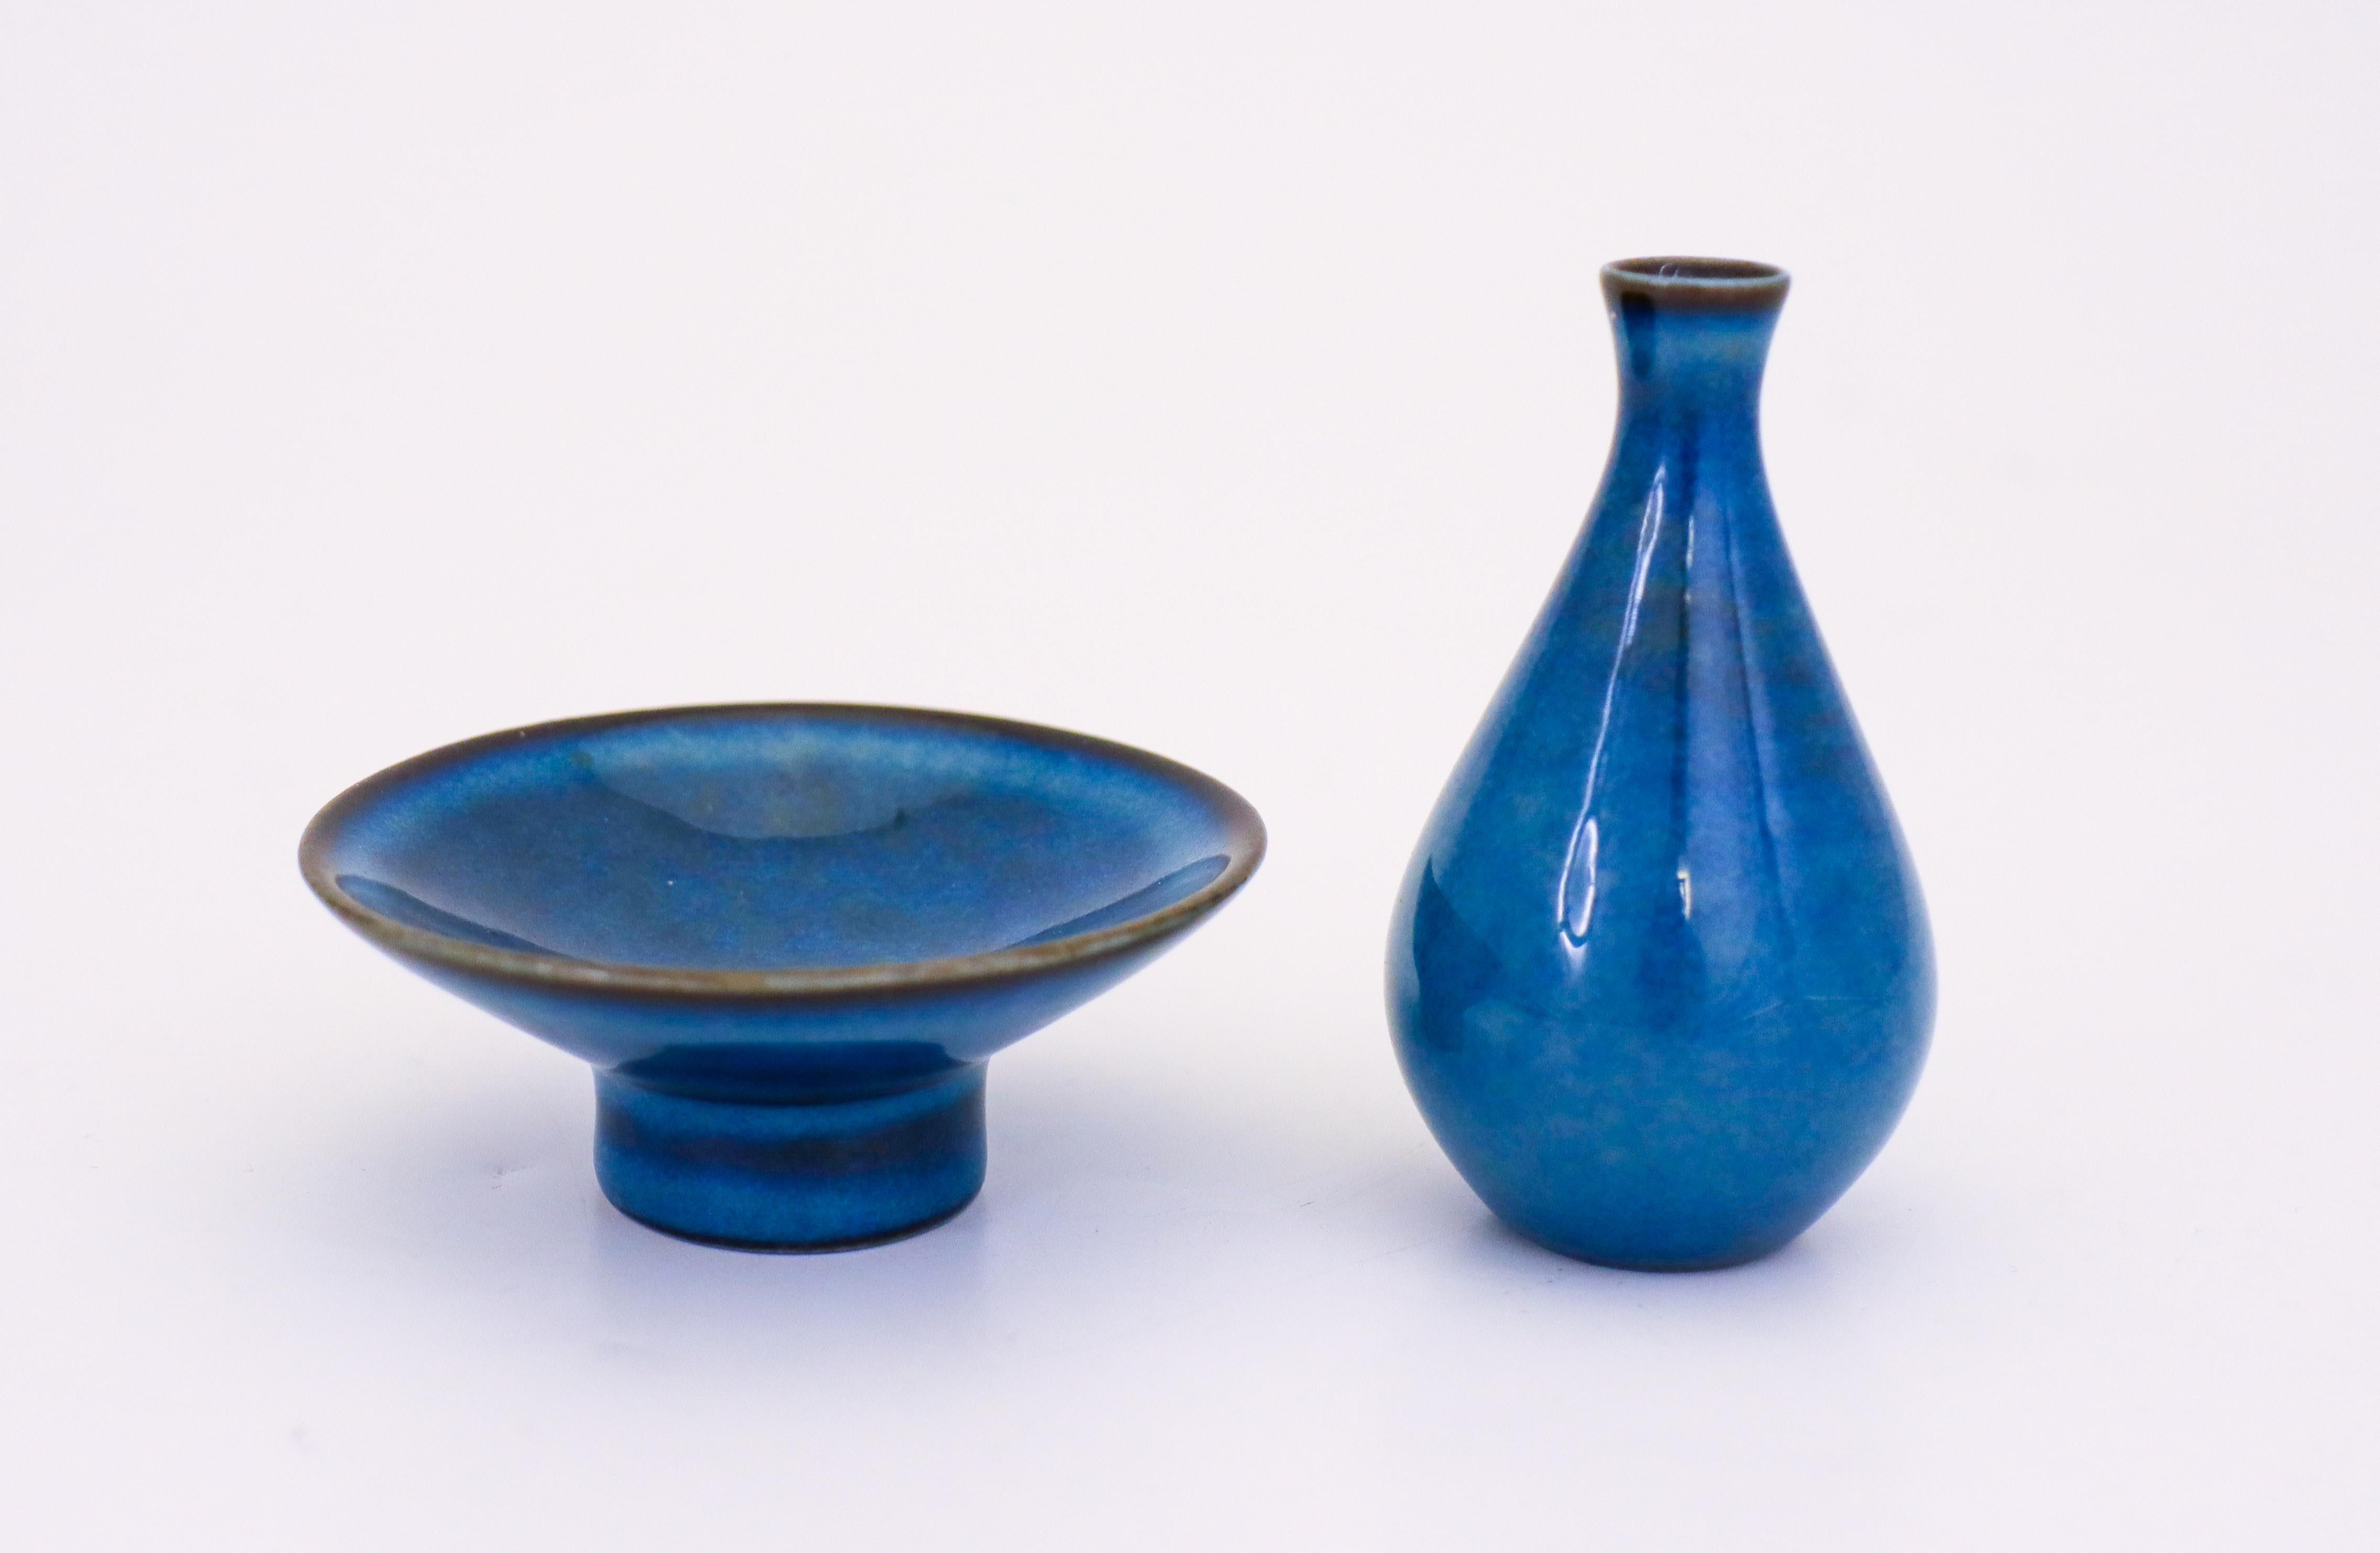 A bowl and a vase with shiny blue glaze designed by Bertil Lundgren at Rörstrand. They are between 3 - 7 cm (1.2